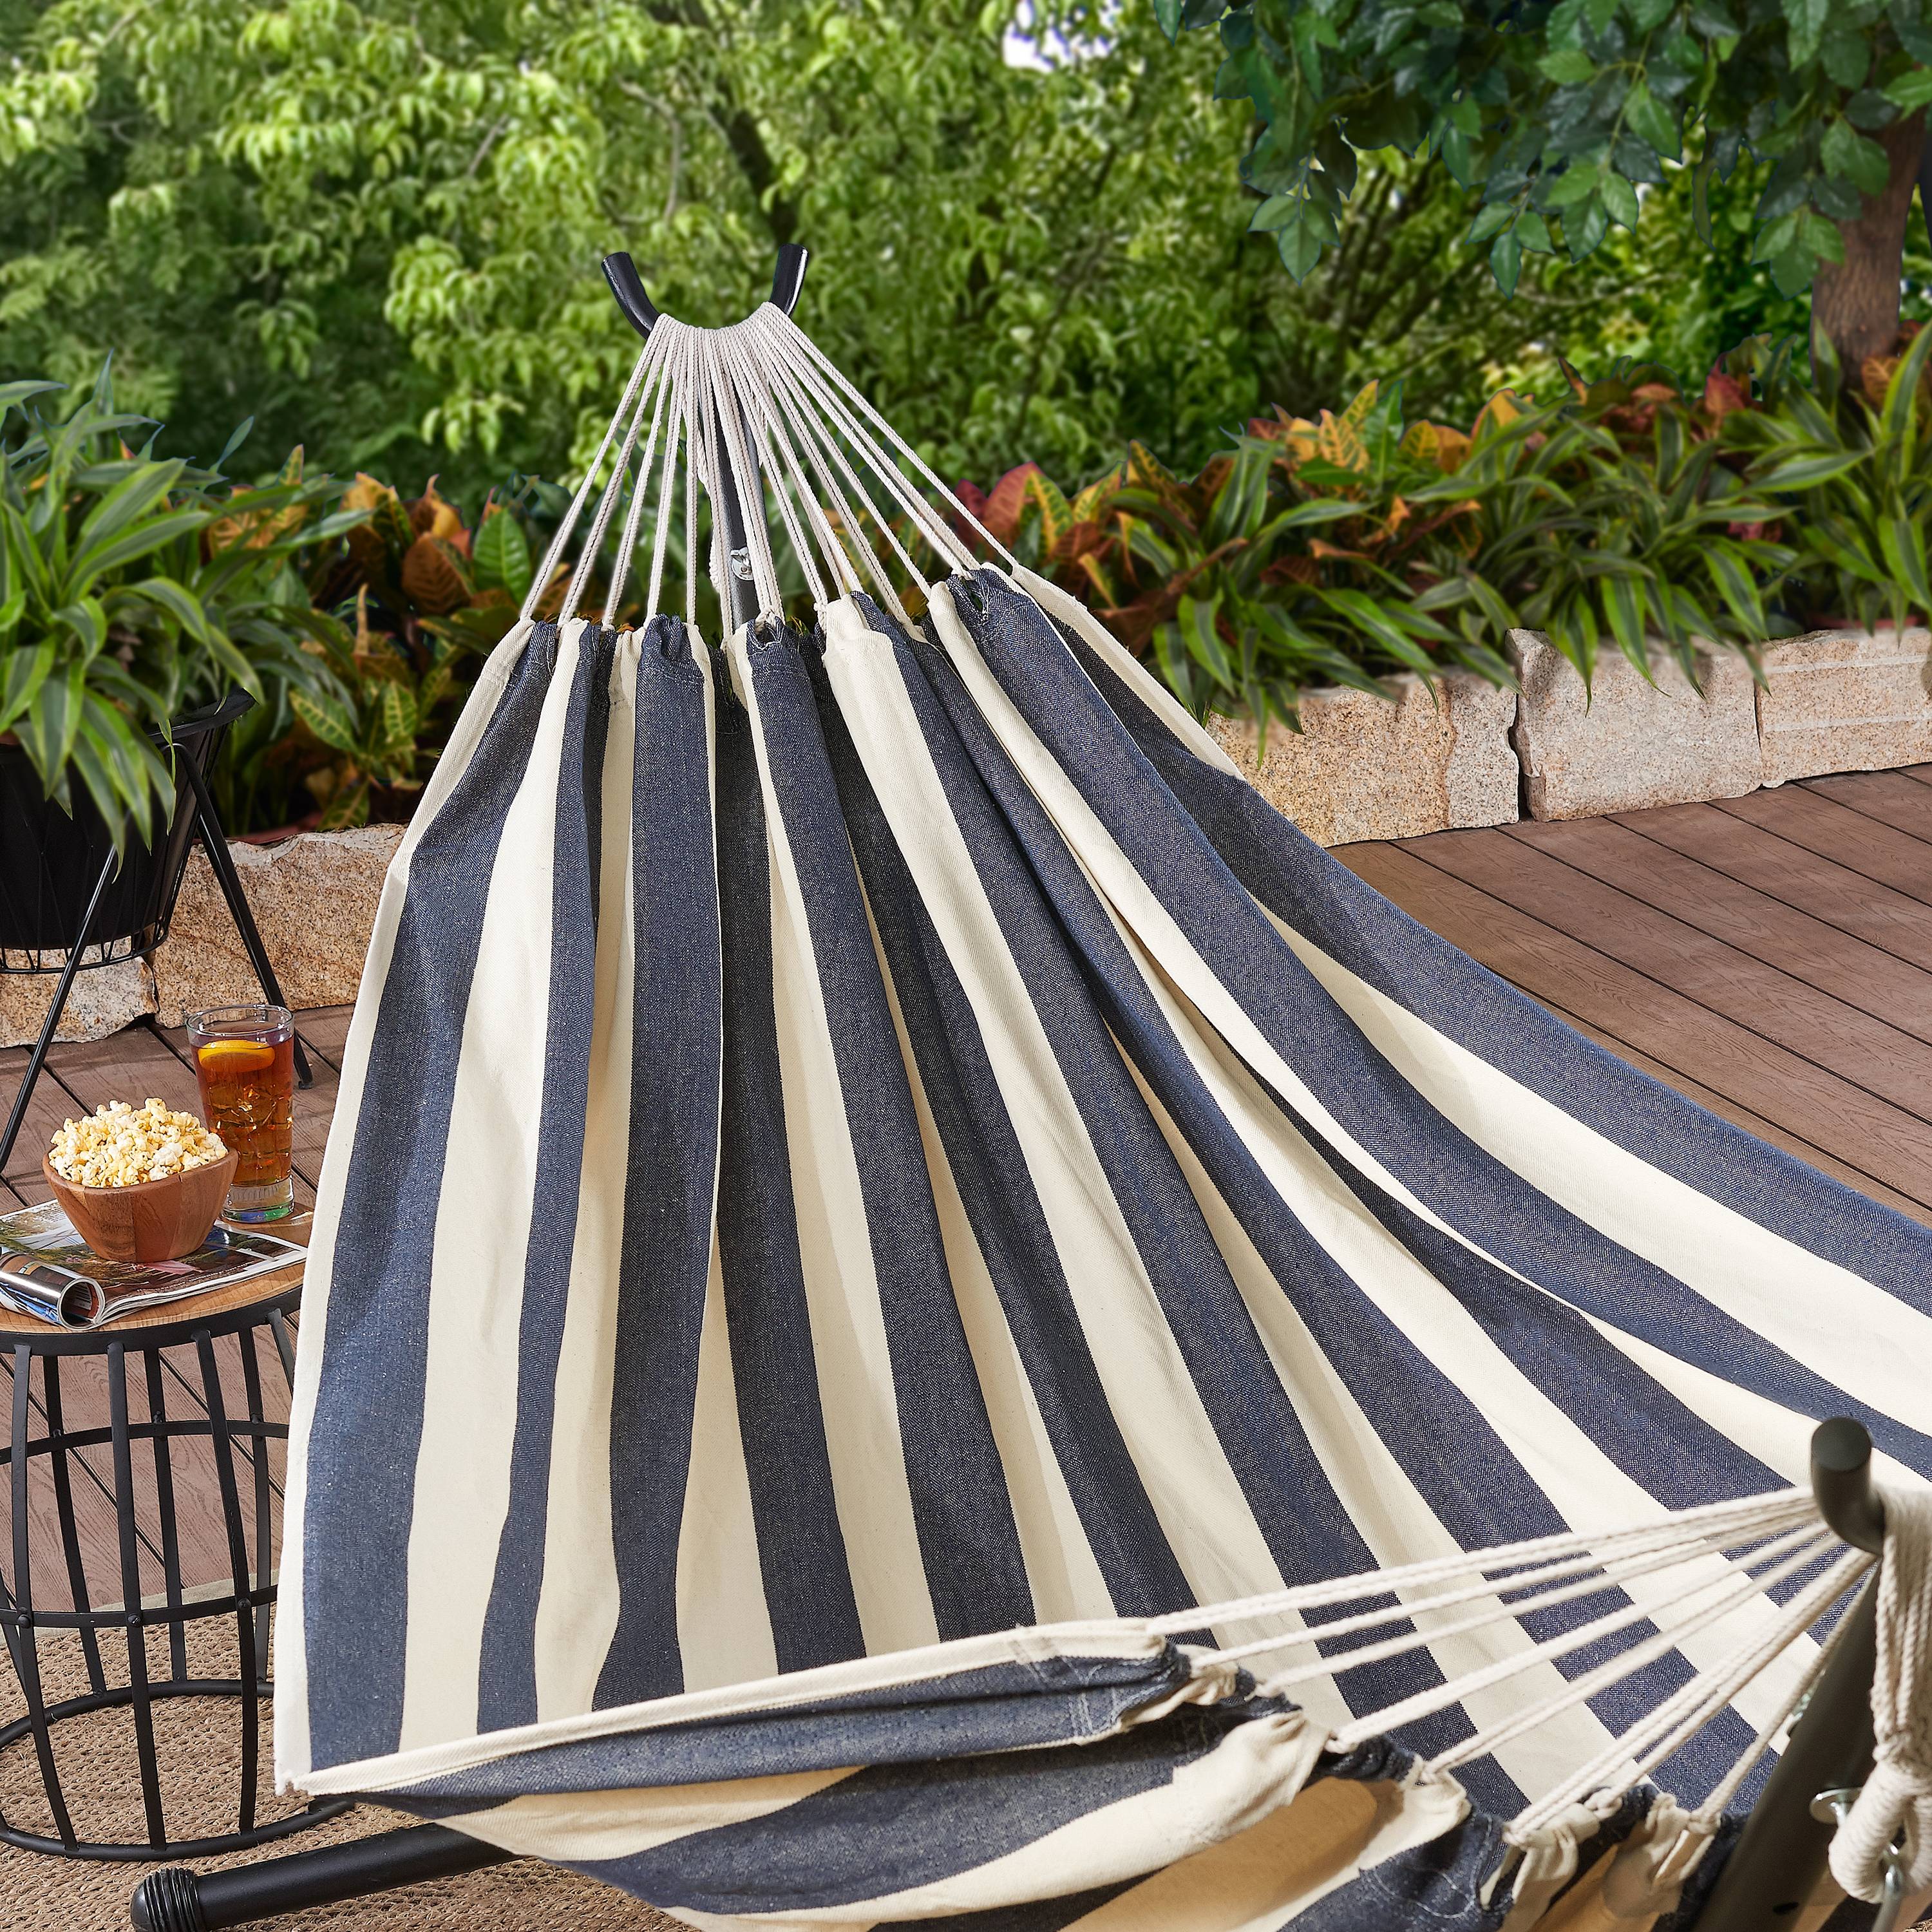 Mainstays Palco black and White Striped Hammock in a Bag, Hammock Size 98.43 x 59.06" (L x W), Load Capacity 250 Lbs - image 1 of 6